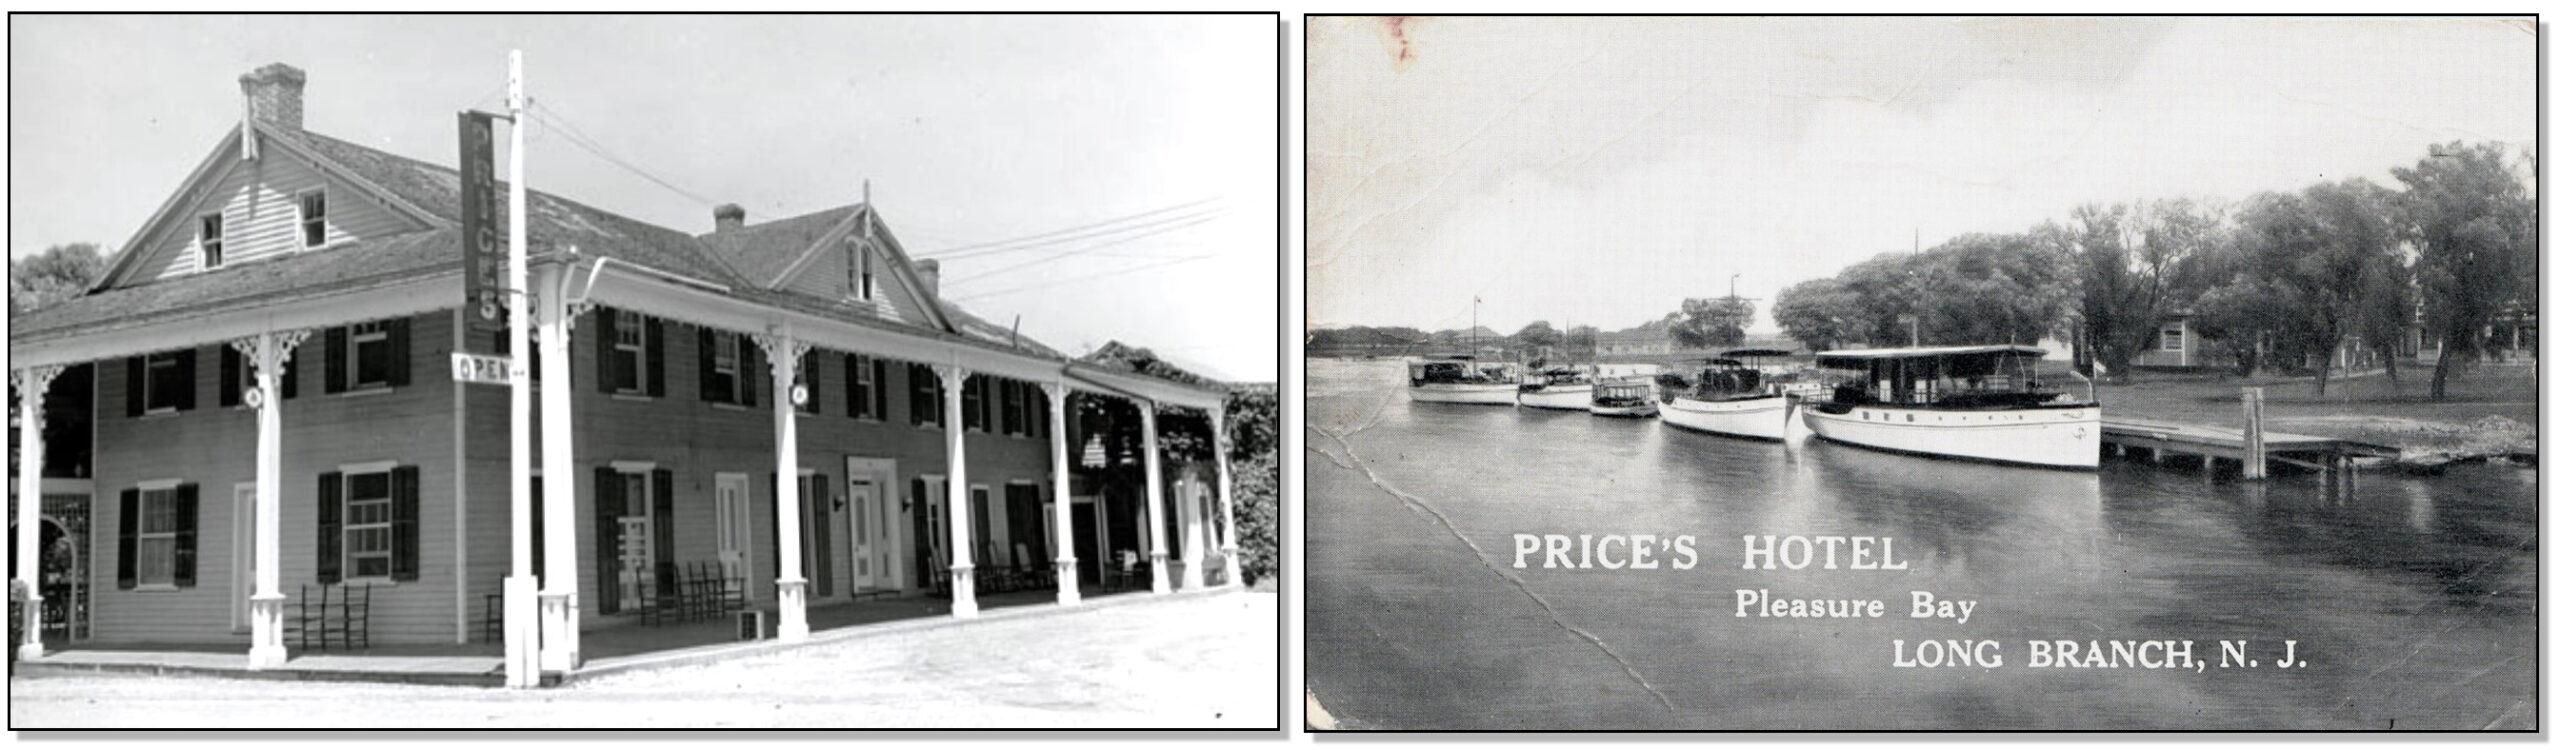 Left: Price’s Hotel in what is now Monmouth Beach. Right: The pier at Price’s Hotel. Images courtesy Greg Kelly, Monmouth Beach Life.com.